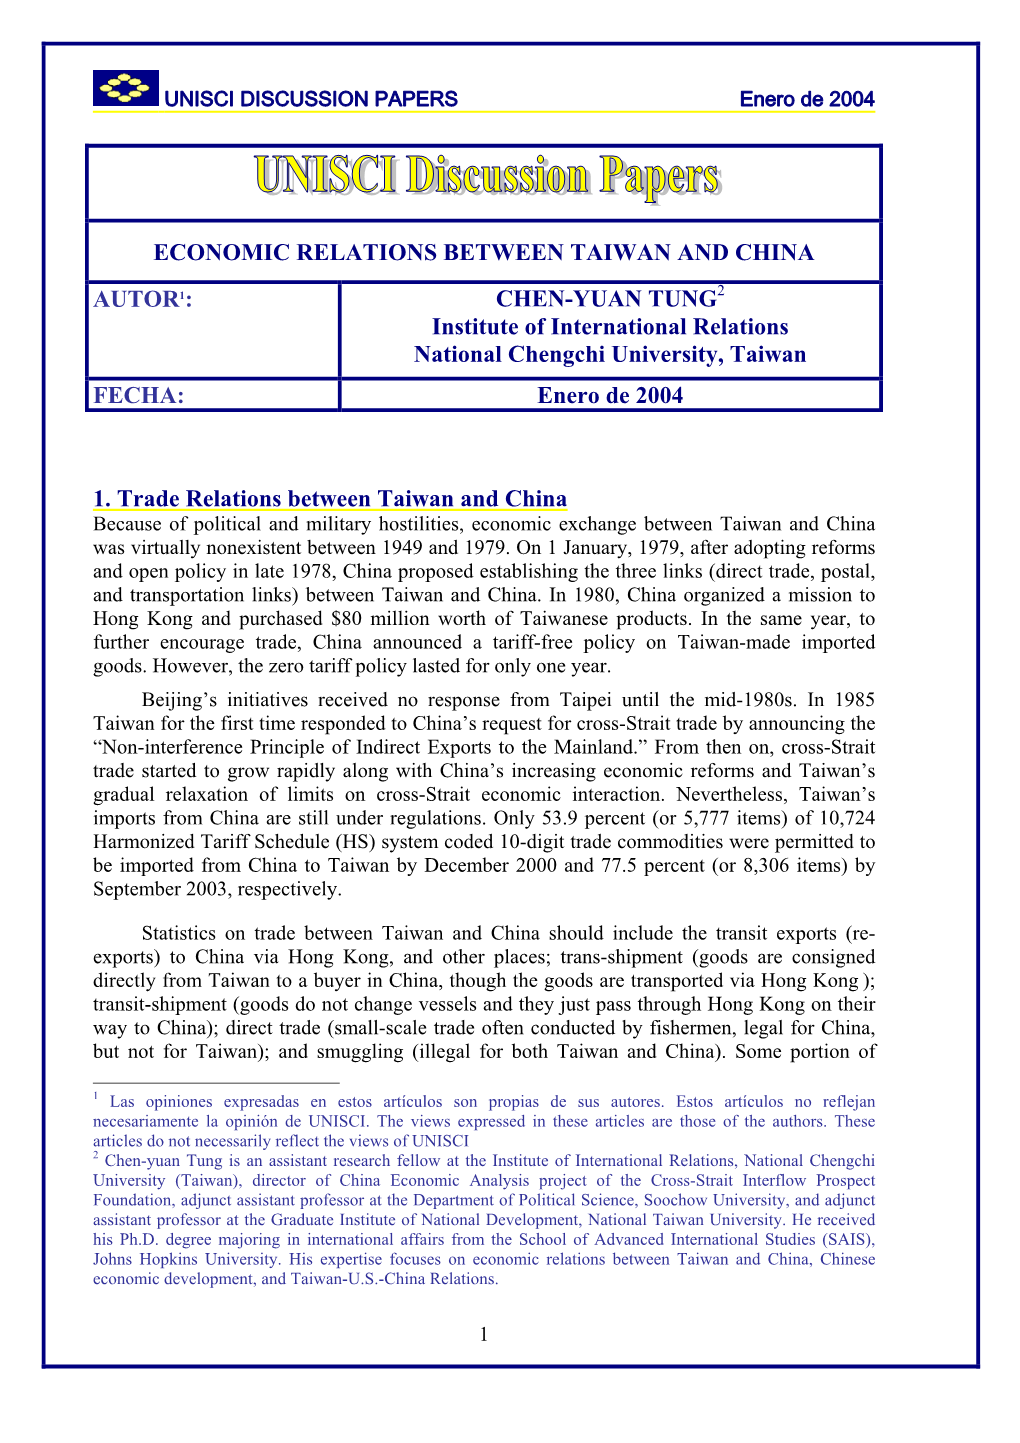 Economic Relations Between Taiwan and China Autor1